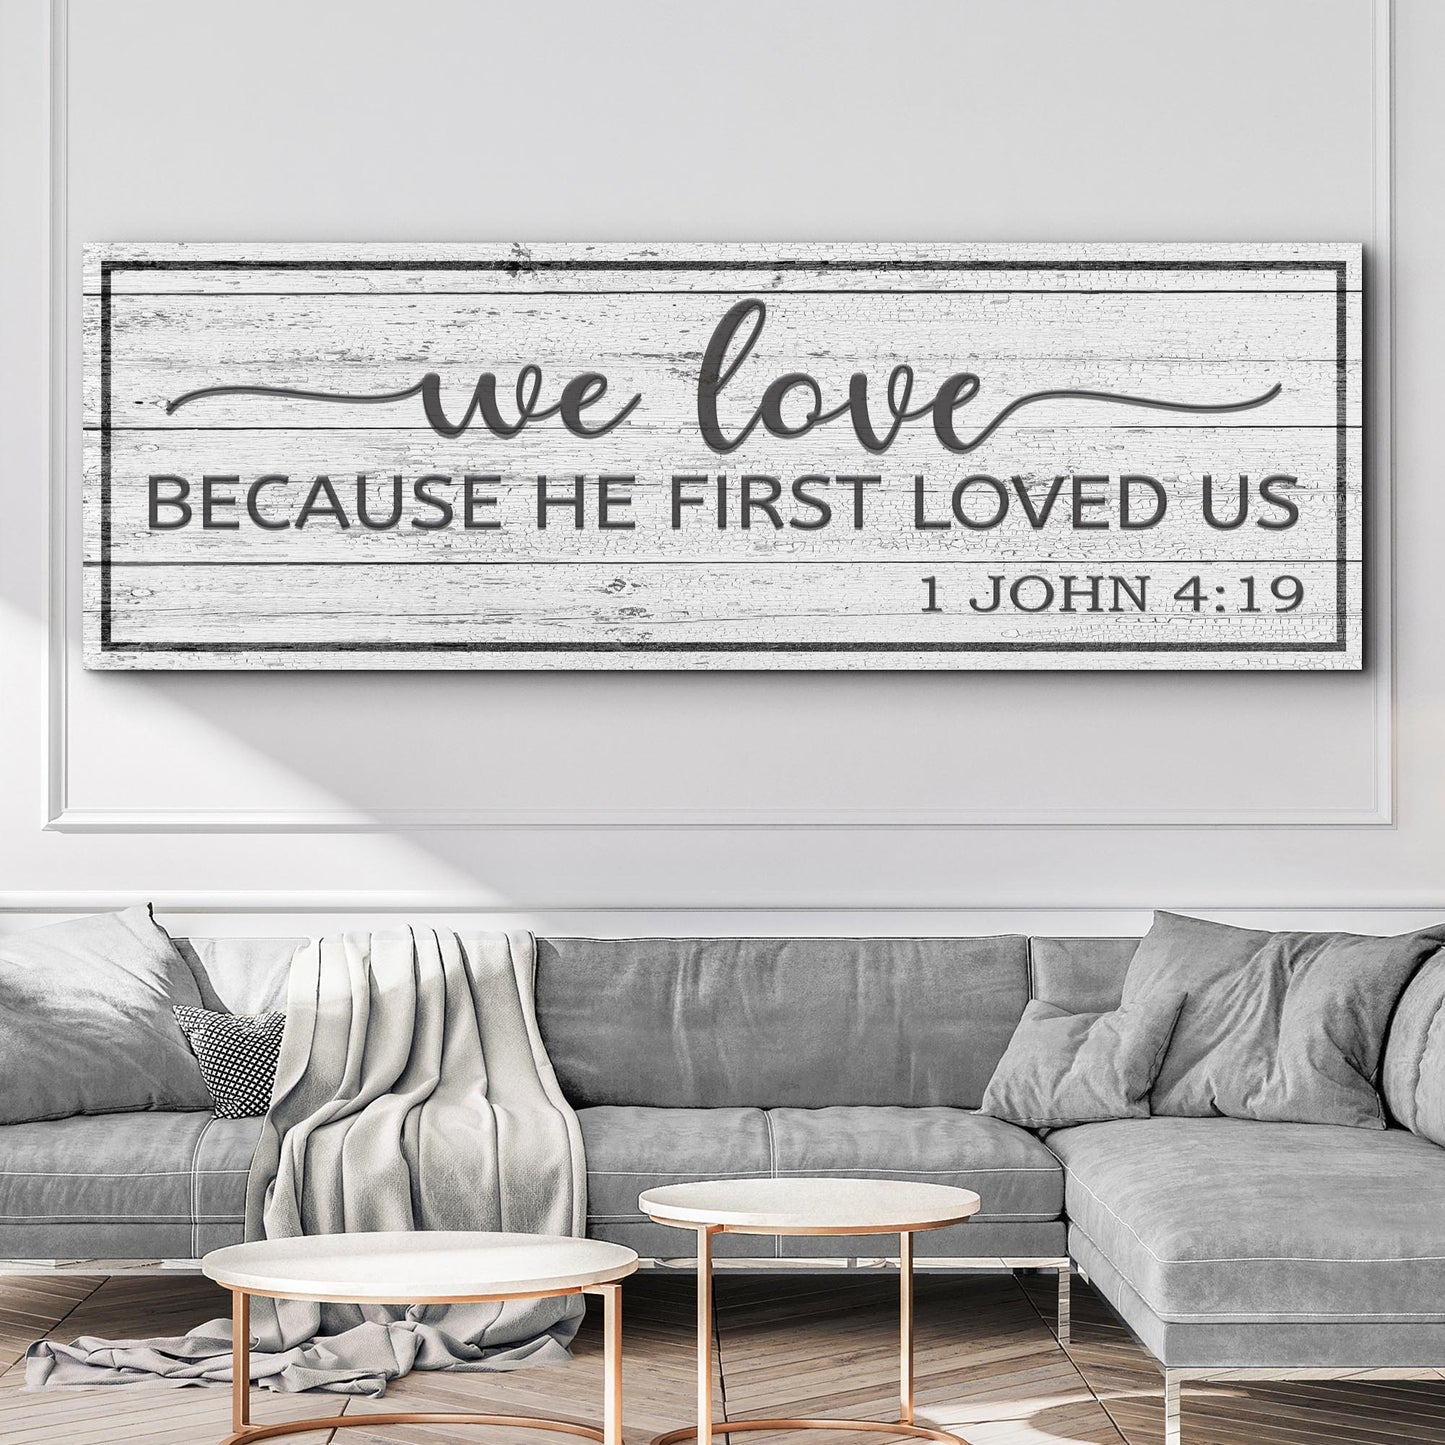 1 John 4:19 Because He First Loved Us Sign - Image by Tailored Canvases